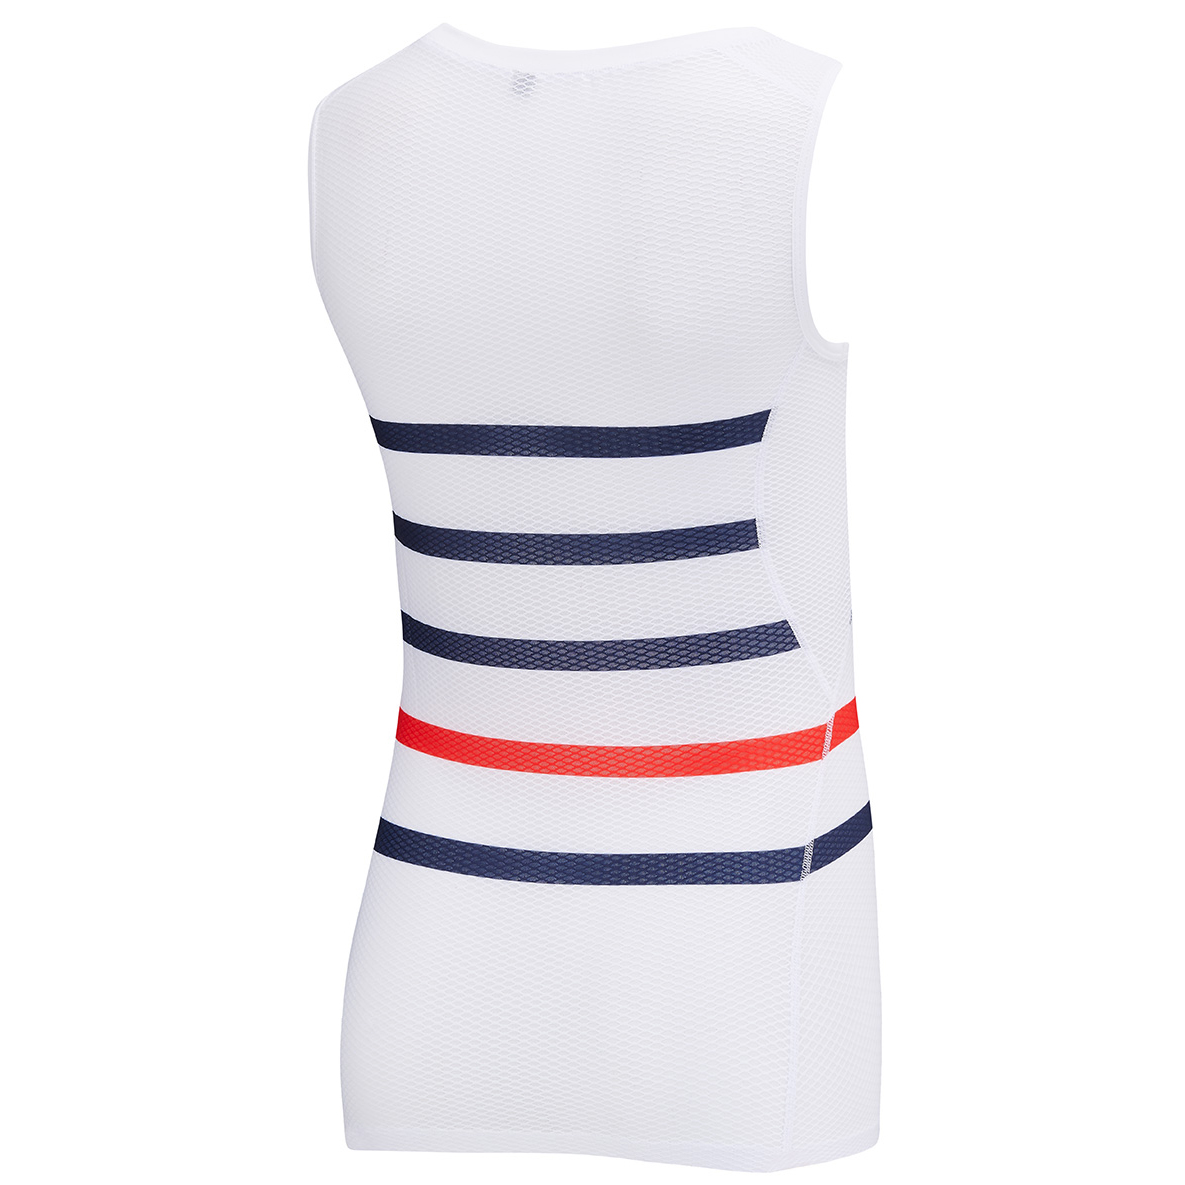 Rear view of Stolen Goat women's Vulcan white mesh cycling base layer with navy and red breton stripes